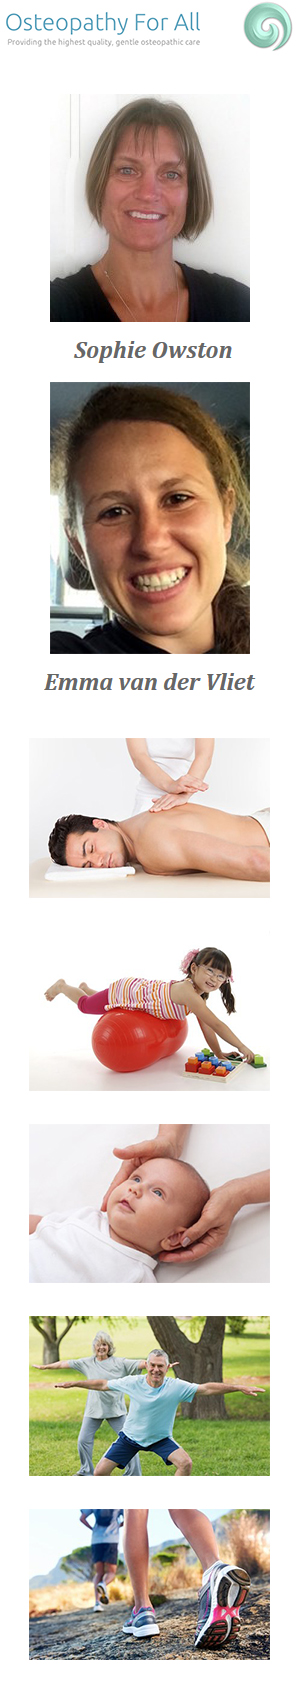 Profile picture for Osteopathy For All